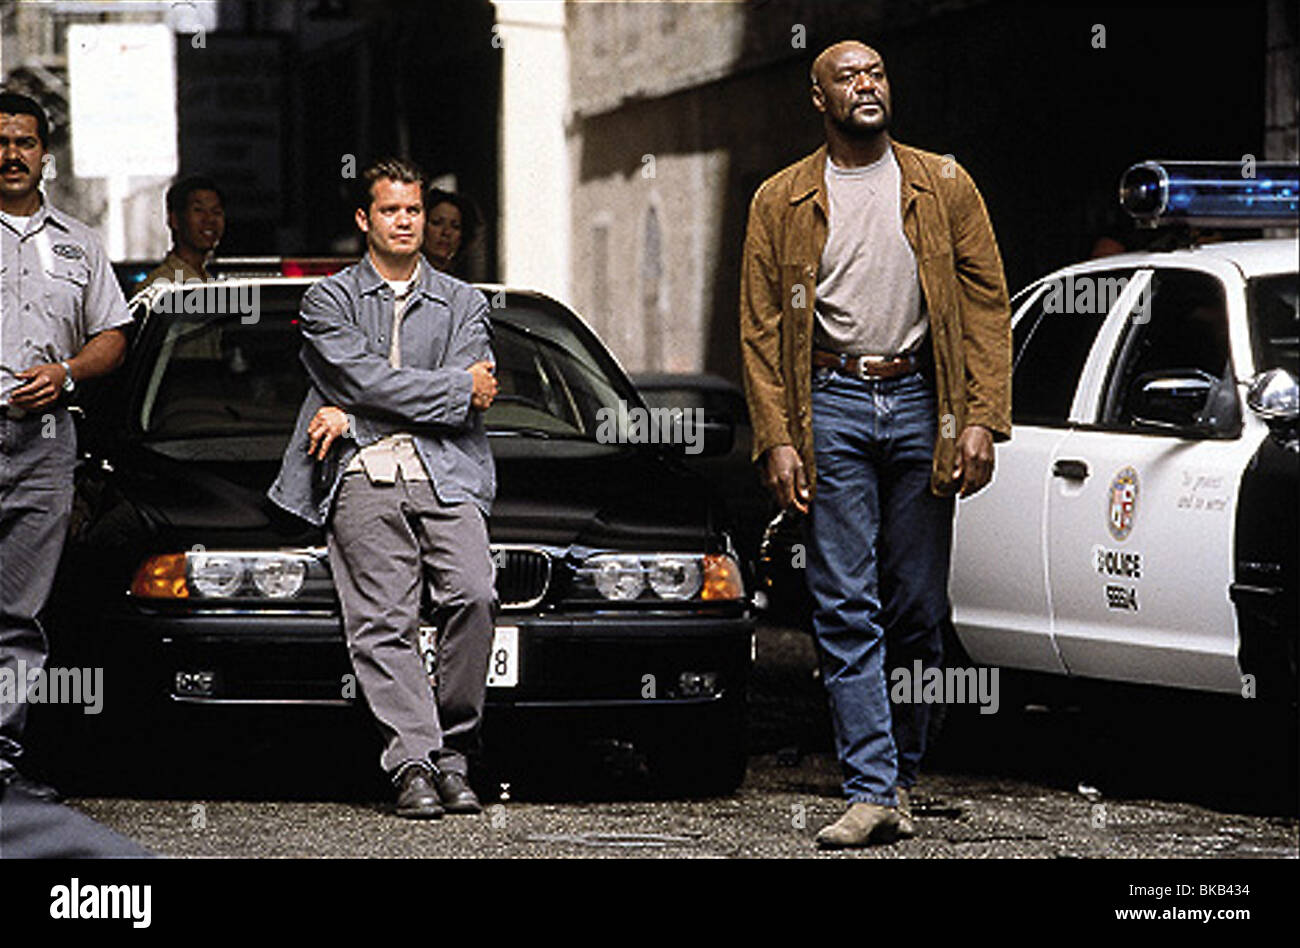 GONE IN 60 SECONDS (2000) TIMOTHY OLYPHANT, DELROY LINDO GO60 001 6559 Stock Photo